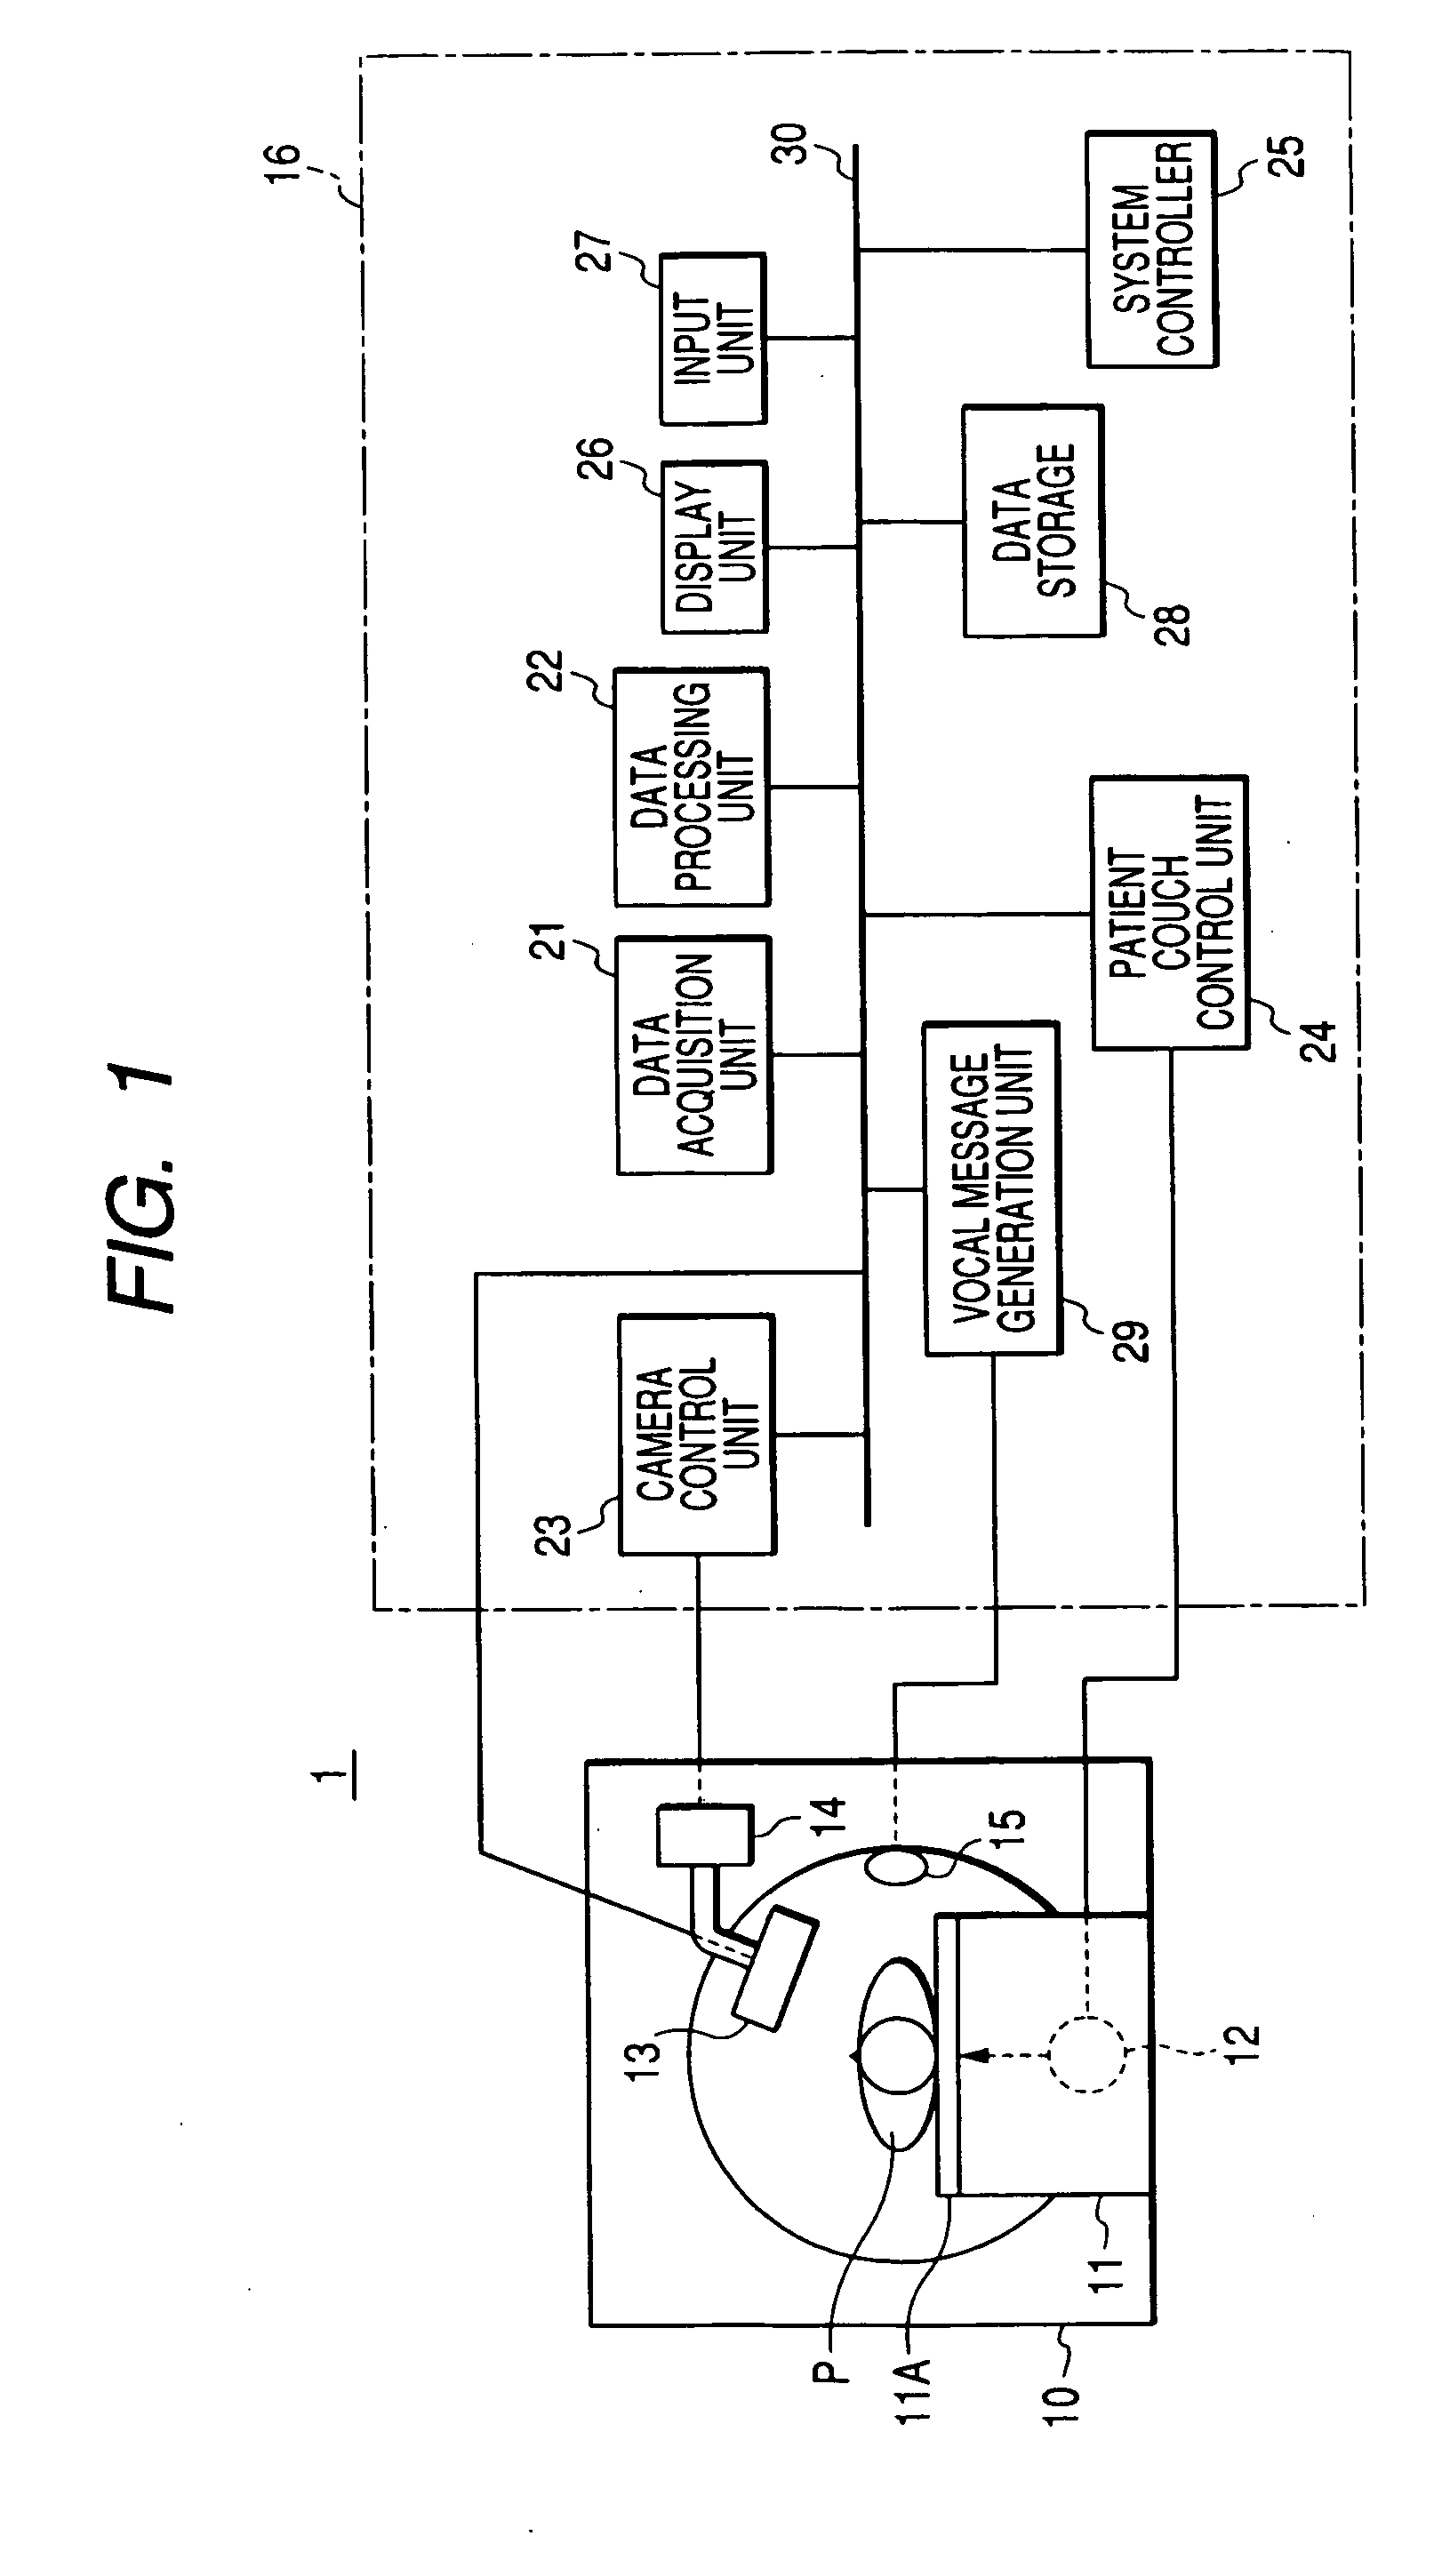 Nuclear medical diagnostic equipment and data acquisition method for nuclear medical diagnosis